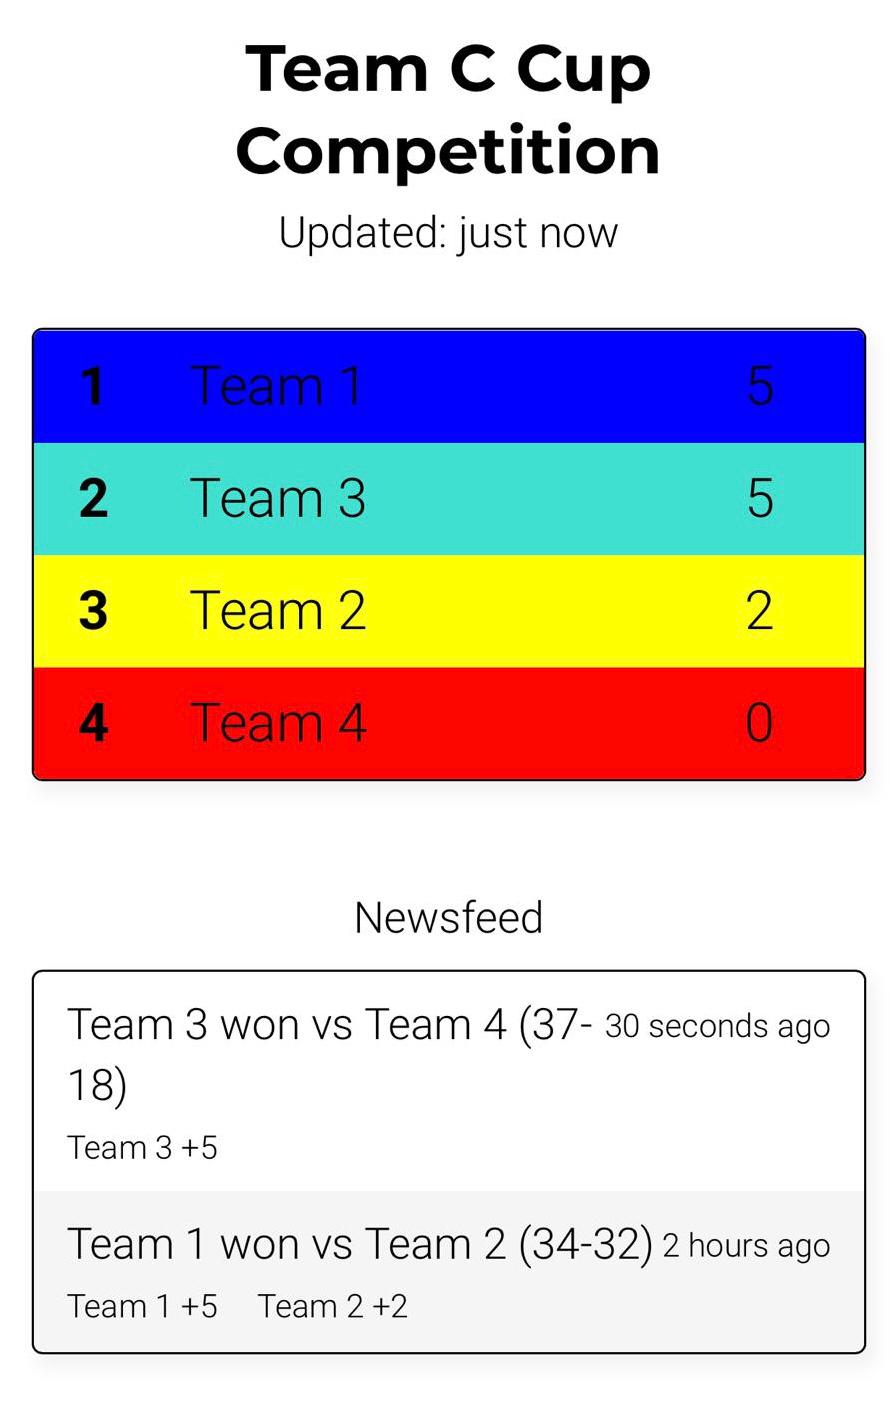 Team C Cup results 10th June